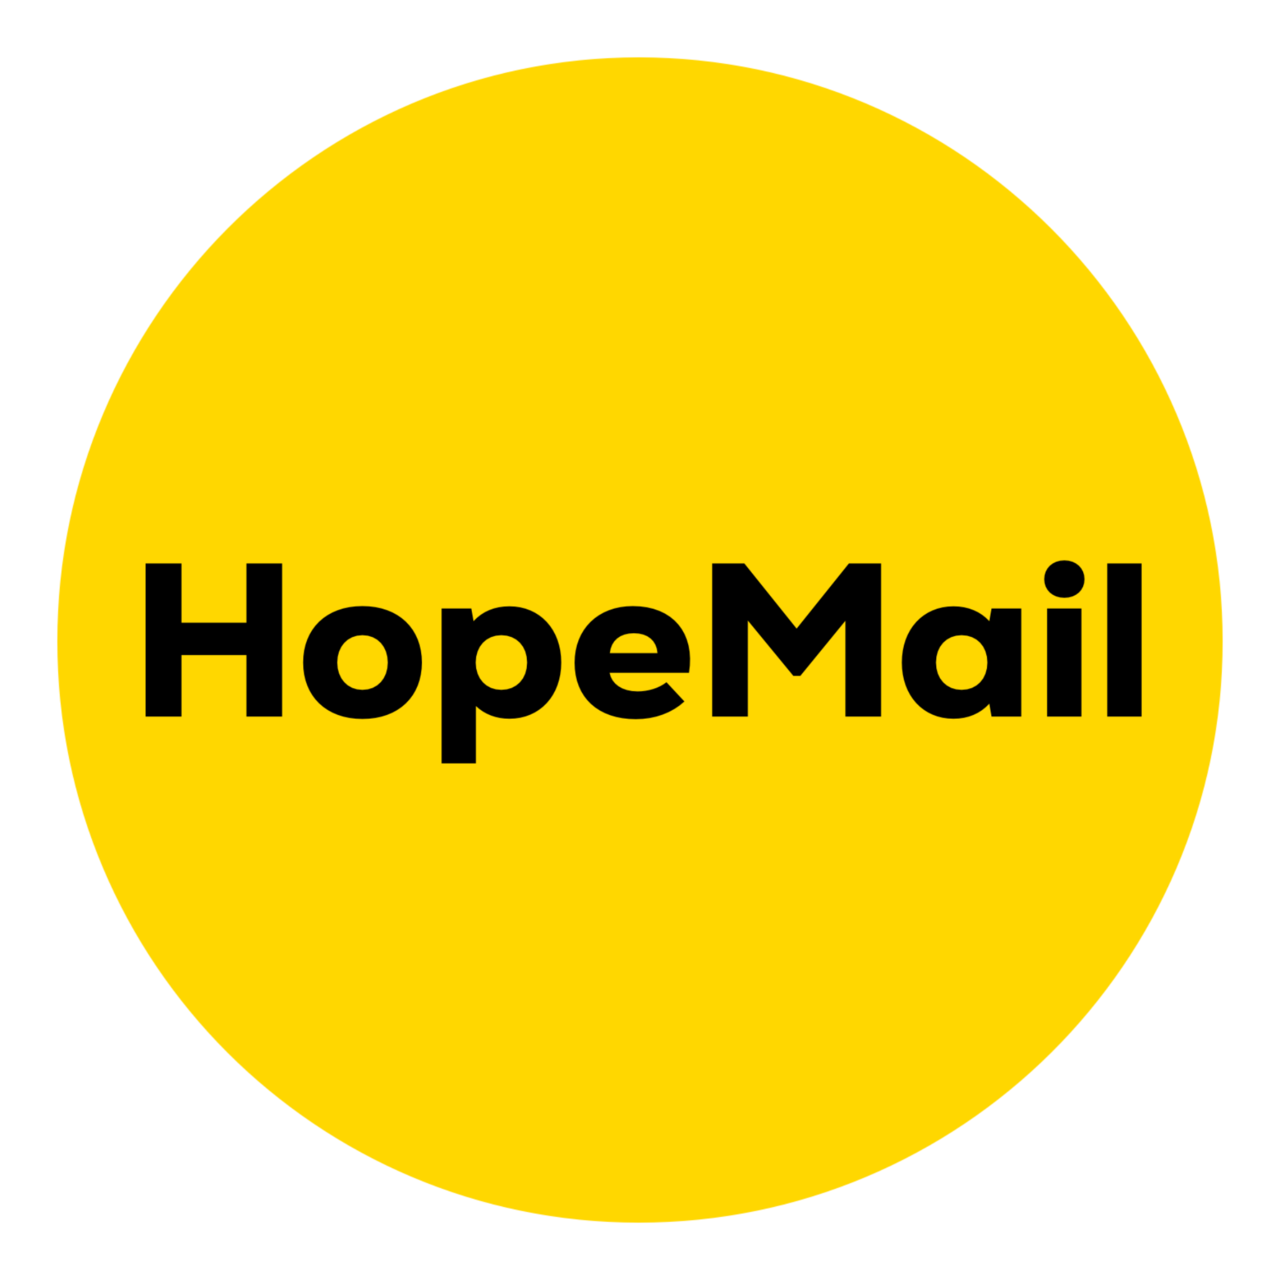 HopeMail